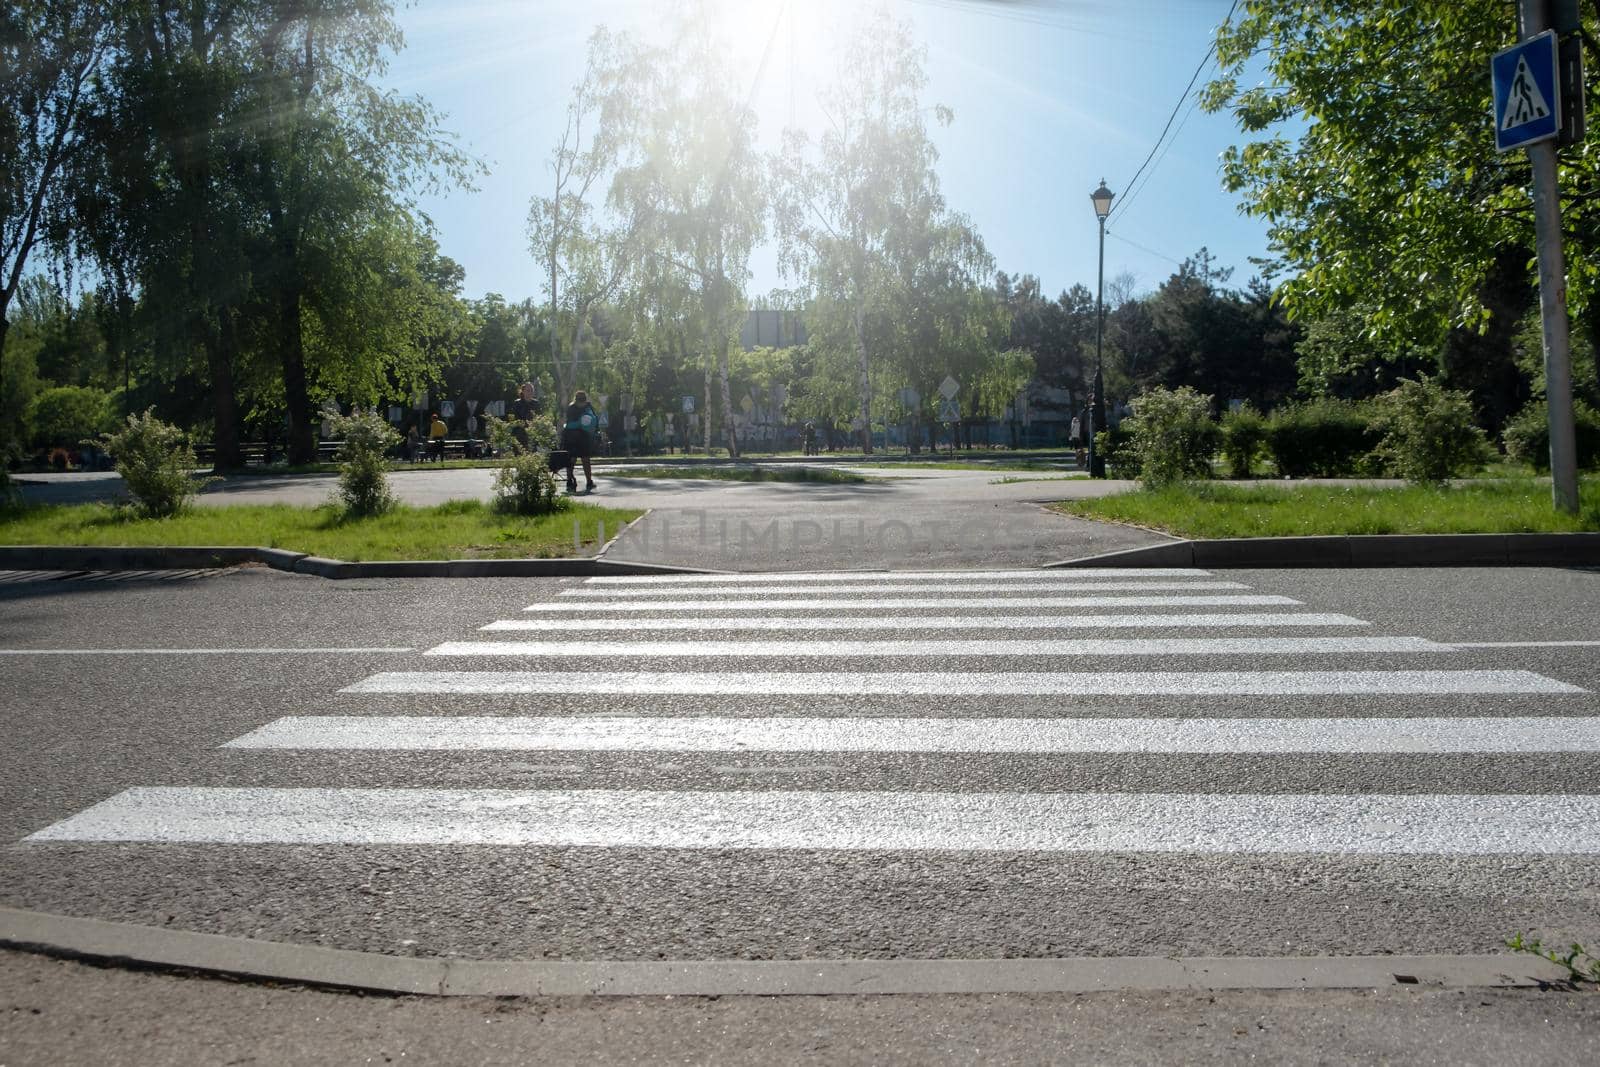 A crosswalk for pedestrians crossing the street. Empty crosswalk to the park on the road. by igor010